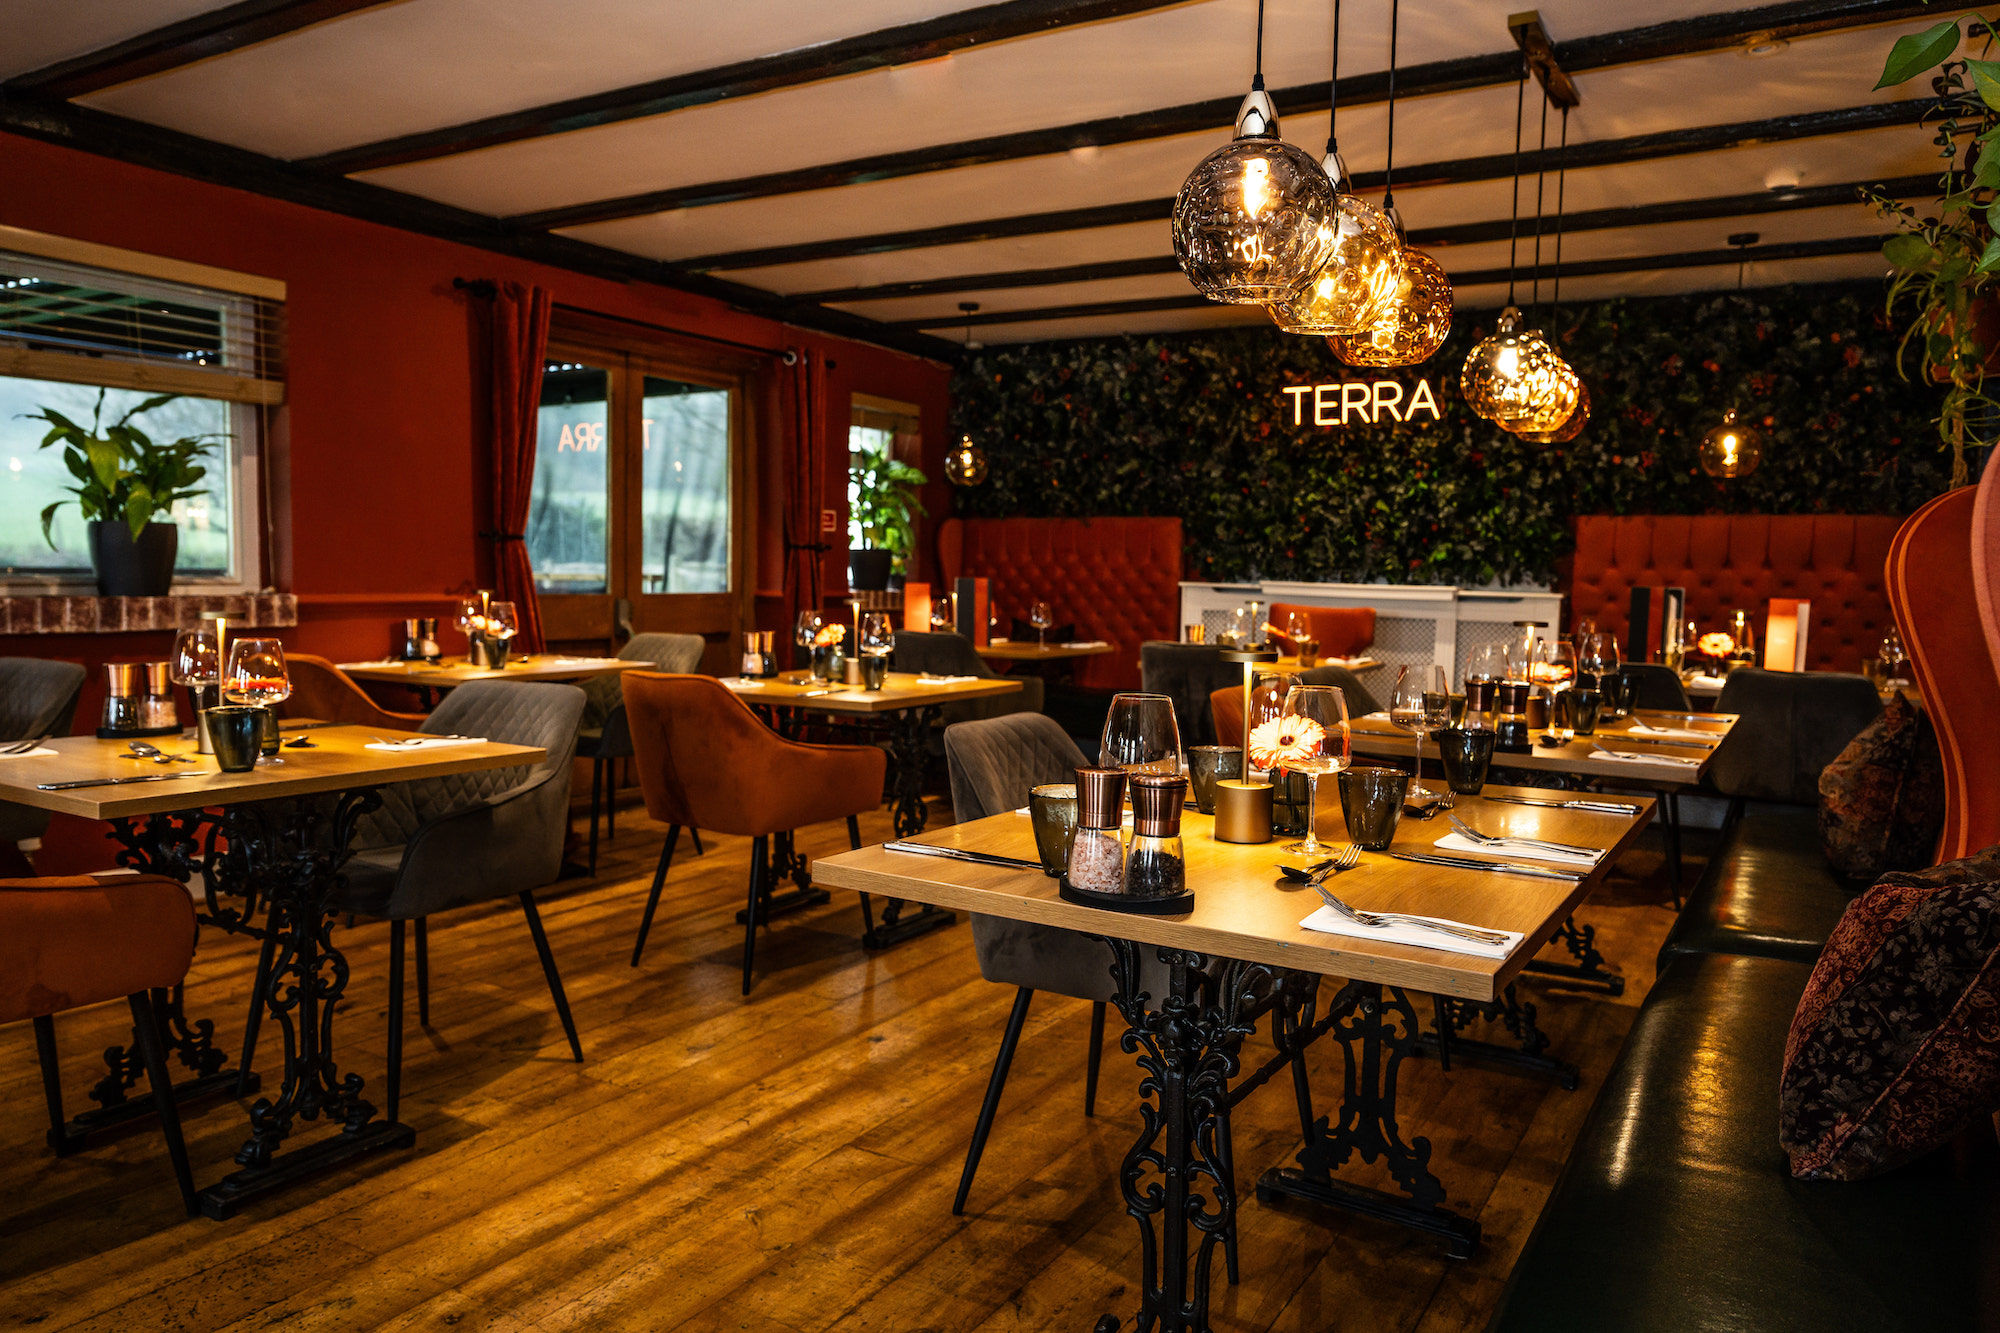 The main dining room at Tottington Manor. Low lit in a traditional setting with darkened wooden beams against a back drop of the Terra restaurant which is a brightly lit sign against a backdrop of foliage.